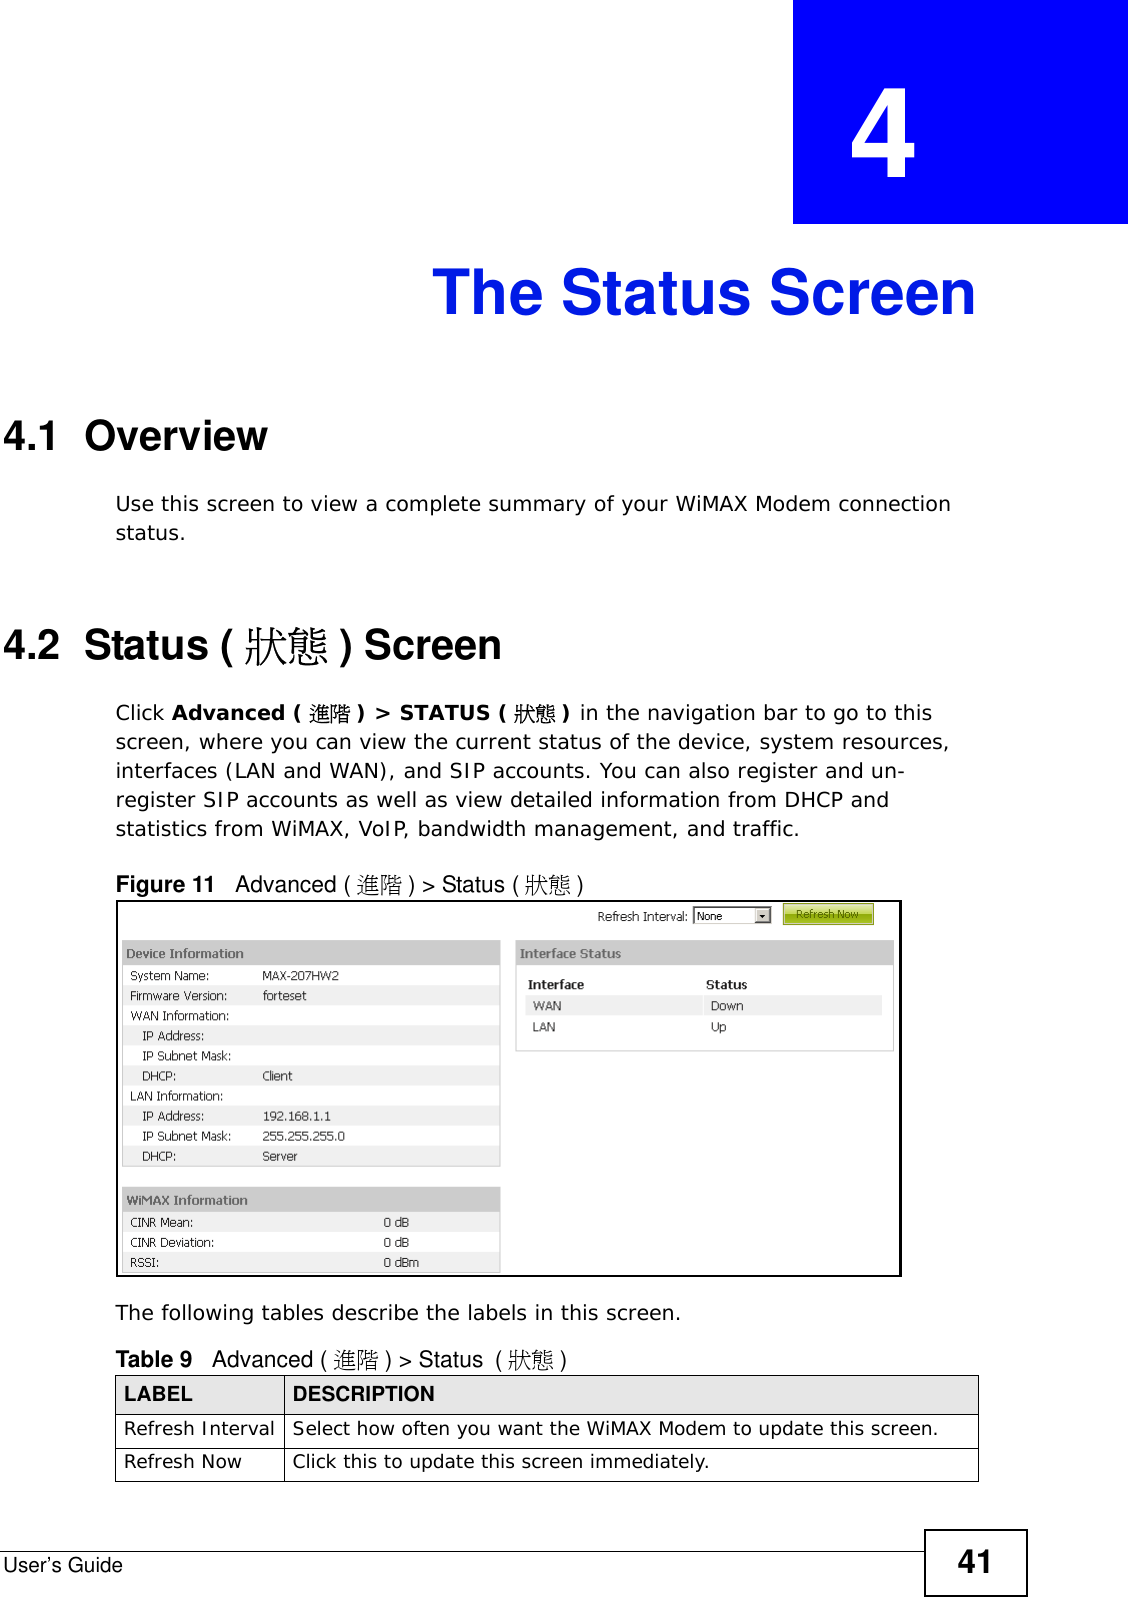 User’s Guide 41CHAPTER  4 The Status Screen4.1  OverviewUse this screen to view a complete summary of your WiMAX Modem connection status.4.2  Status ( 狀態 ) ScreenClick Advanced ( 進階 ) &gt; STATUS ( 狀態 ) in the navigation bar to go to this screen, where you can view the current status of the device, system resources, interfaces (LAN and WAN), and SIP accounts. You can also register and un-register SIP accounts as well as view detailed information from DHCP and statistics from WiMAX, VoIP, bandwidth management, and traffic.Figure 11   Advanced ( 進階 ) &gt; Status ( 狀態 )The following tables describe the labels in this screen.    Table 9   Advanced ( 進階 ) &gt; Status (狀態 )LABEL DESCRIPTIONRefresh Interval Select how often you want the WiMAX Modem to update this screen.Refresh Now Click this to update this screen immediately.